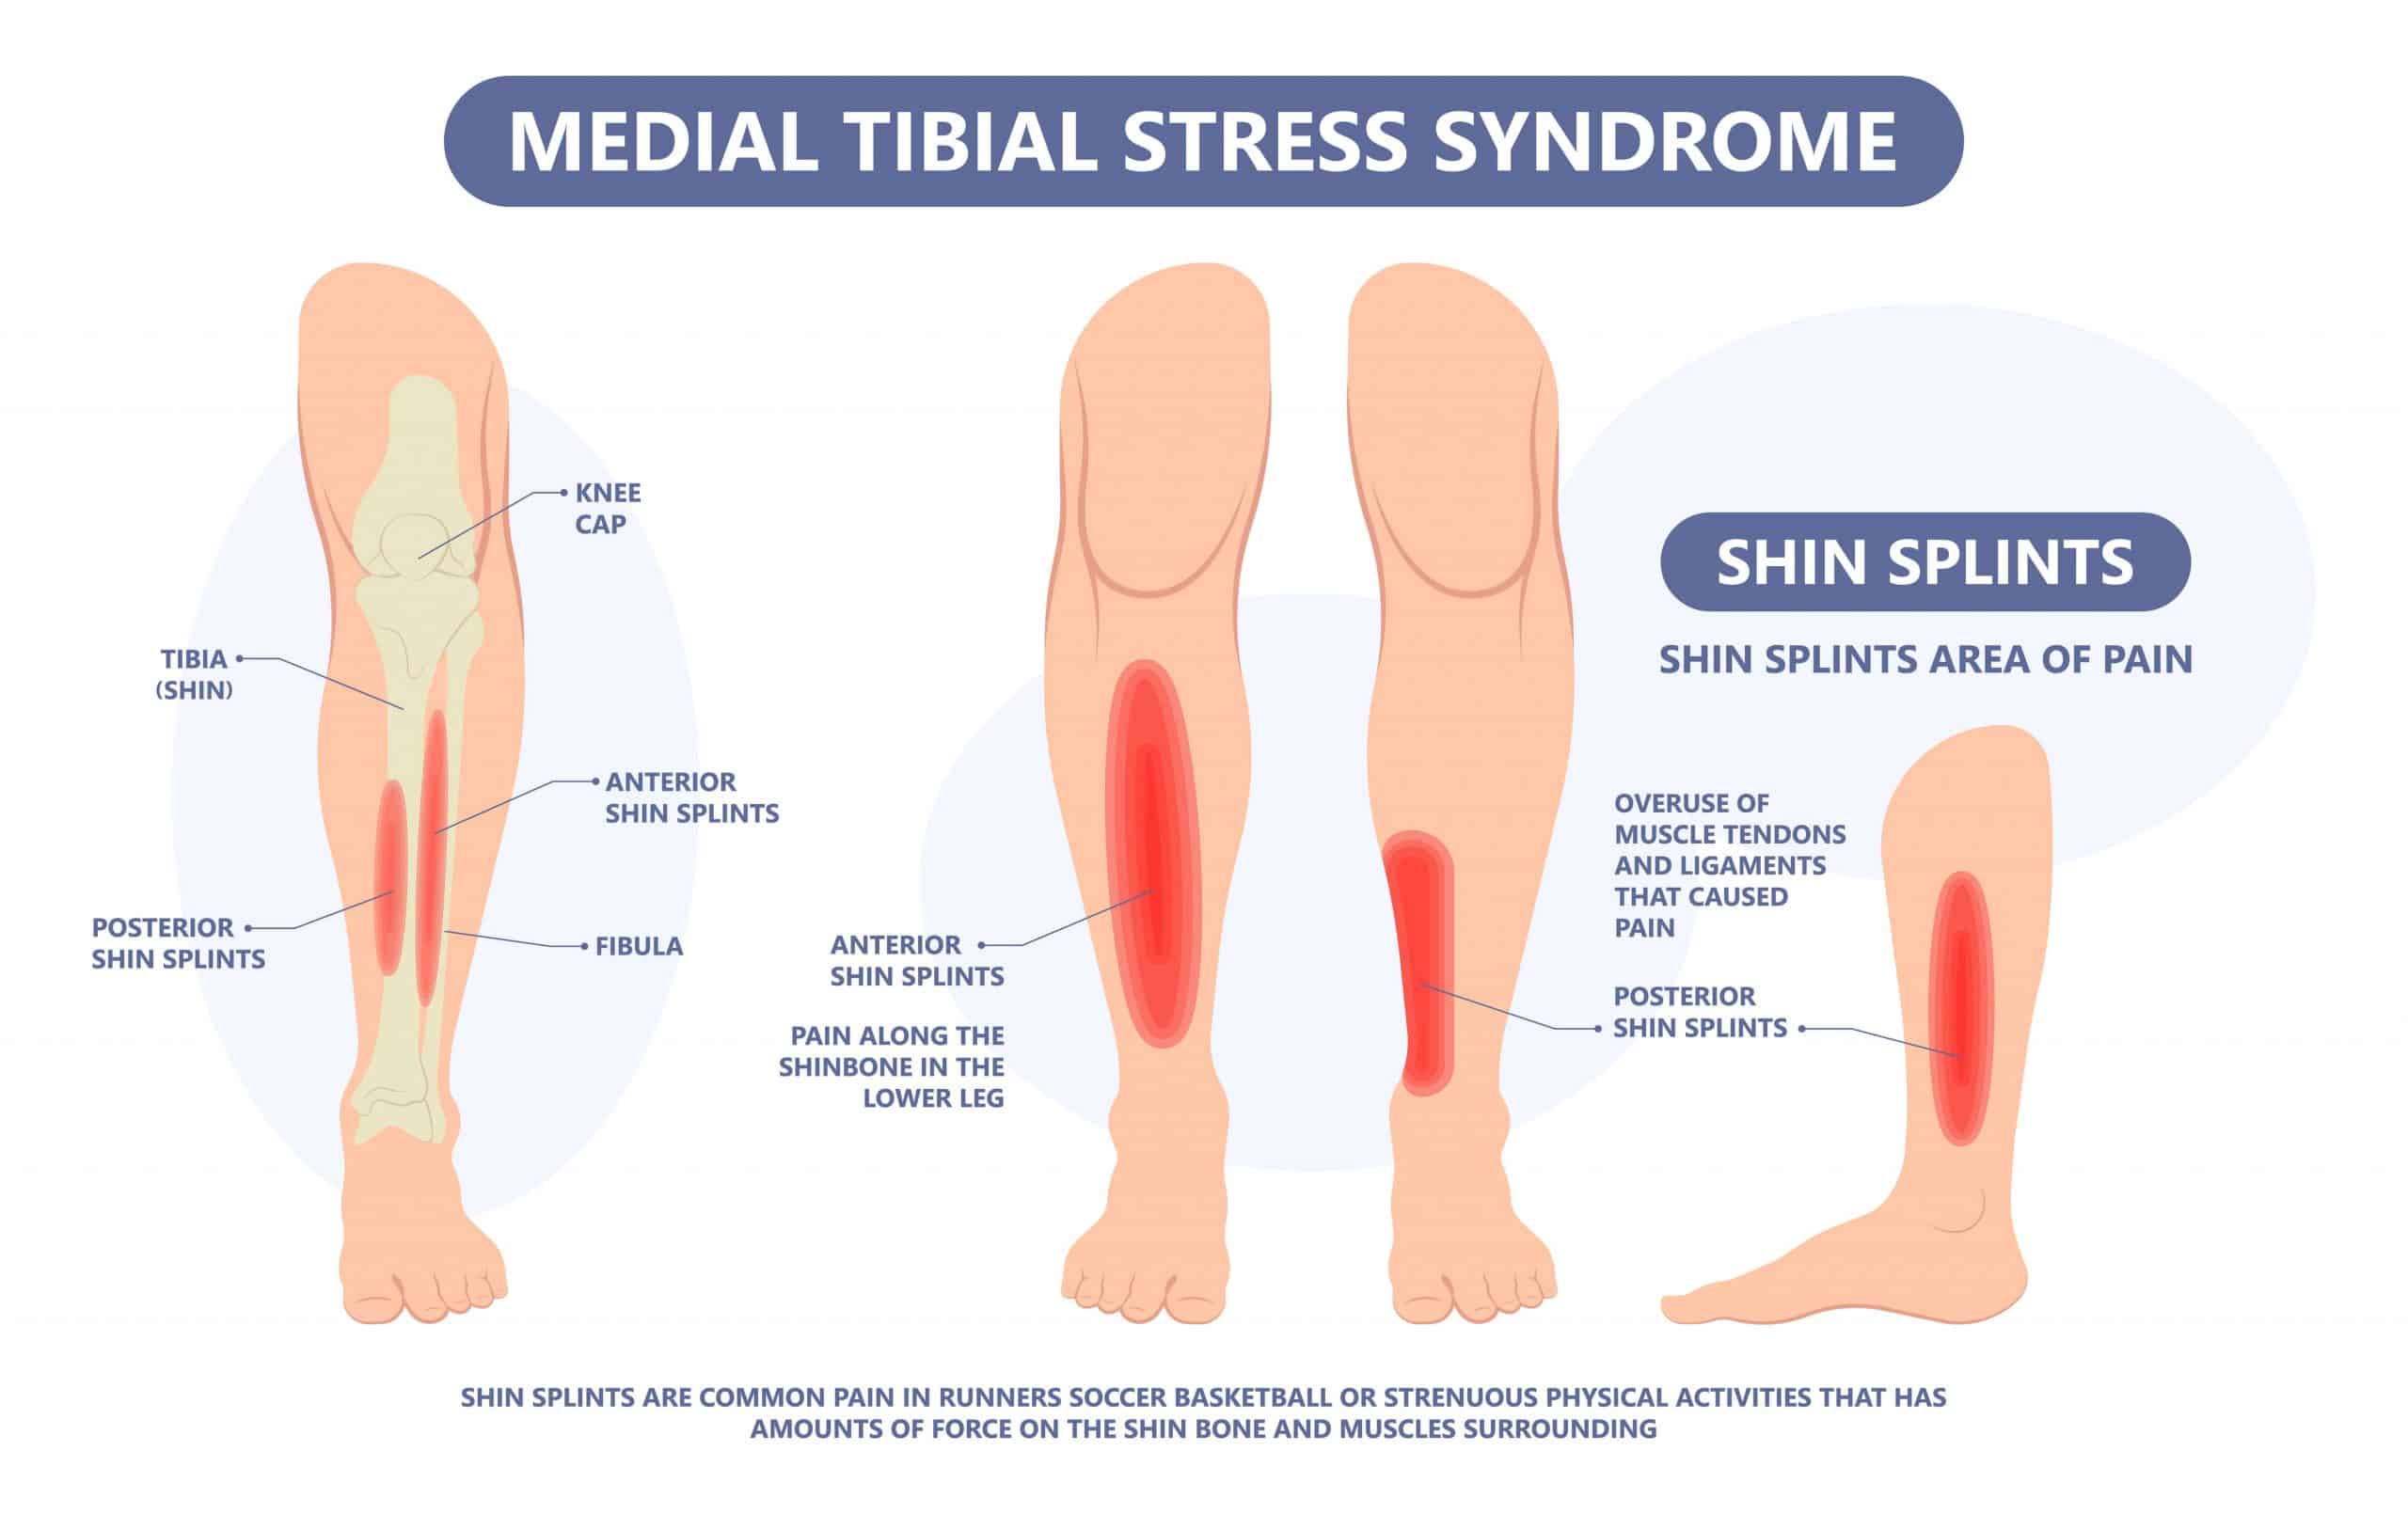 Shin Splints: What are they and What are the symptoms? - James